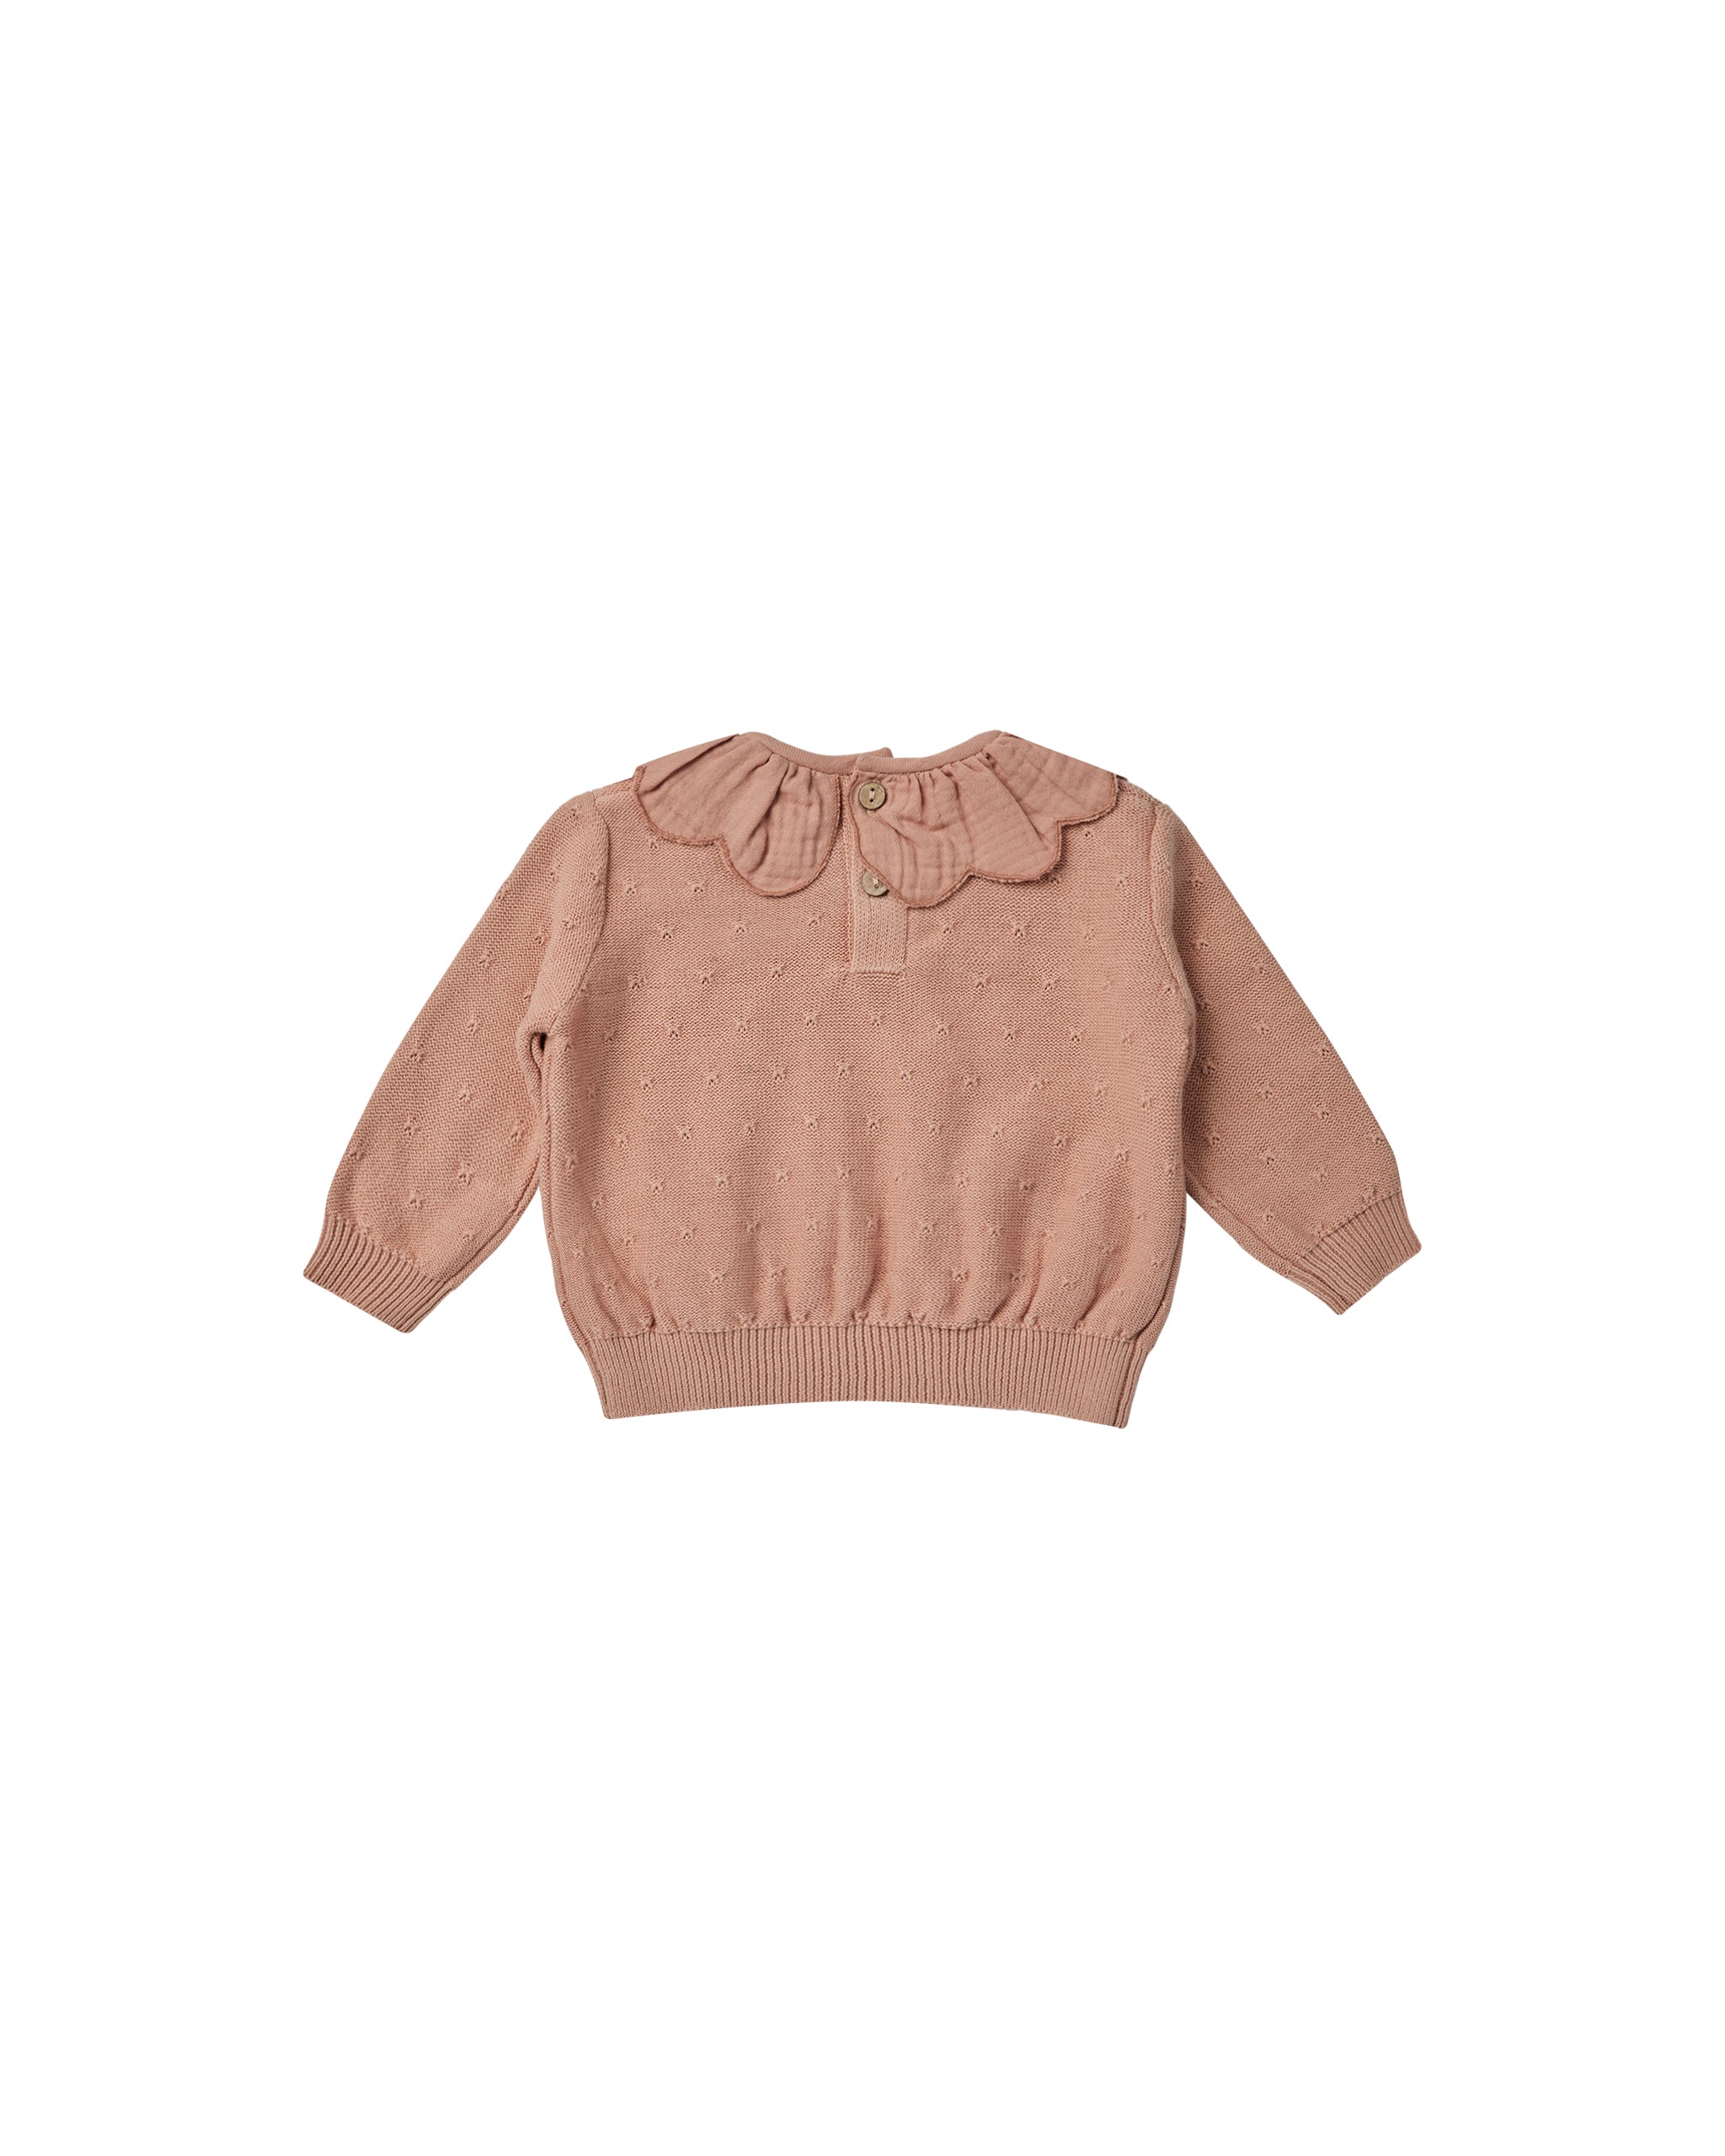 Quincy Mae Petal Knit Sweater - Rose